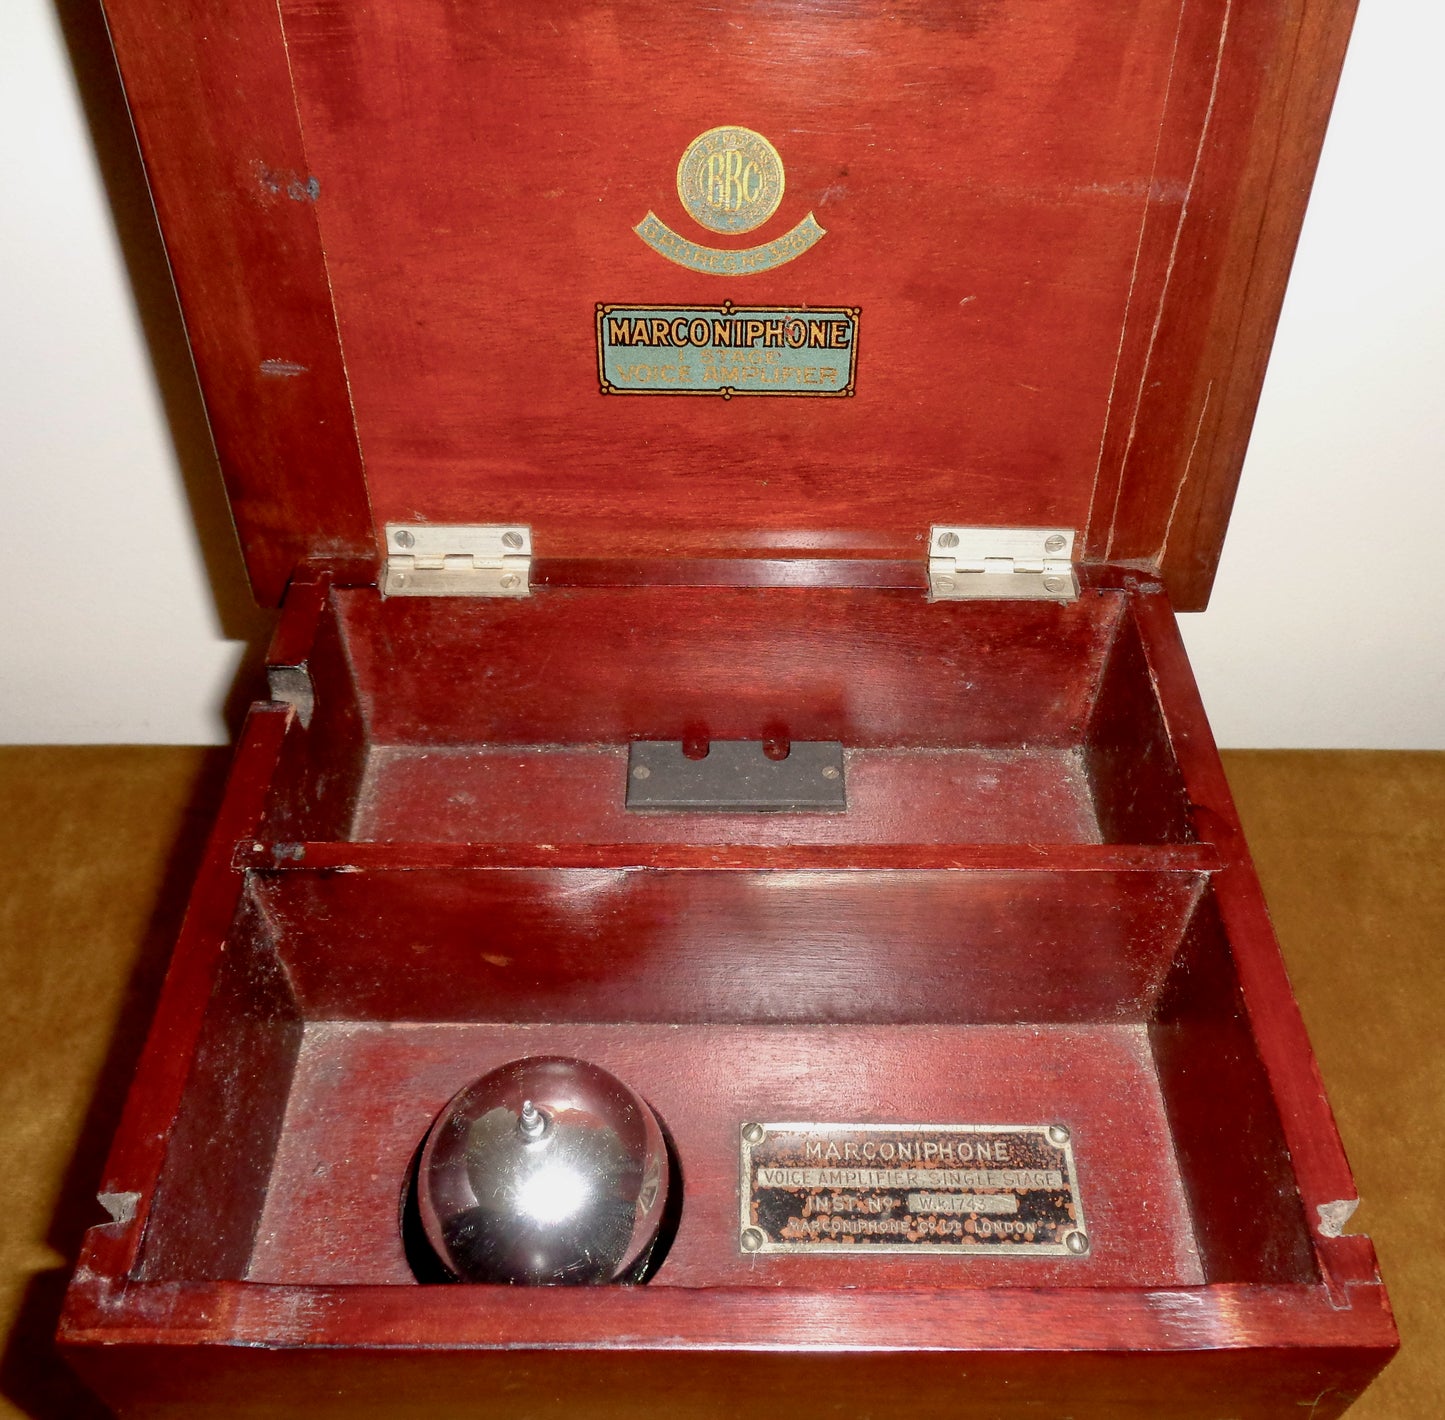 1920s Marconiphone NB1 Single Stage Voice Amplifier Wk 1743